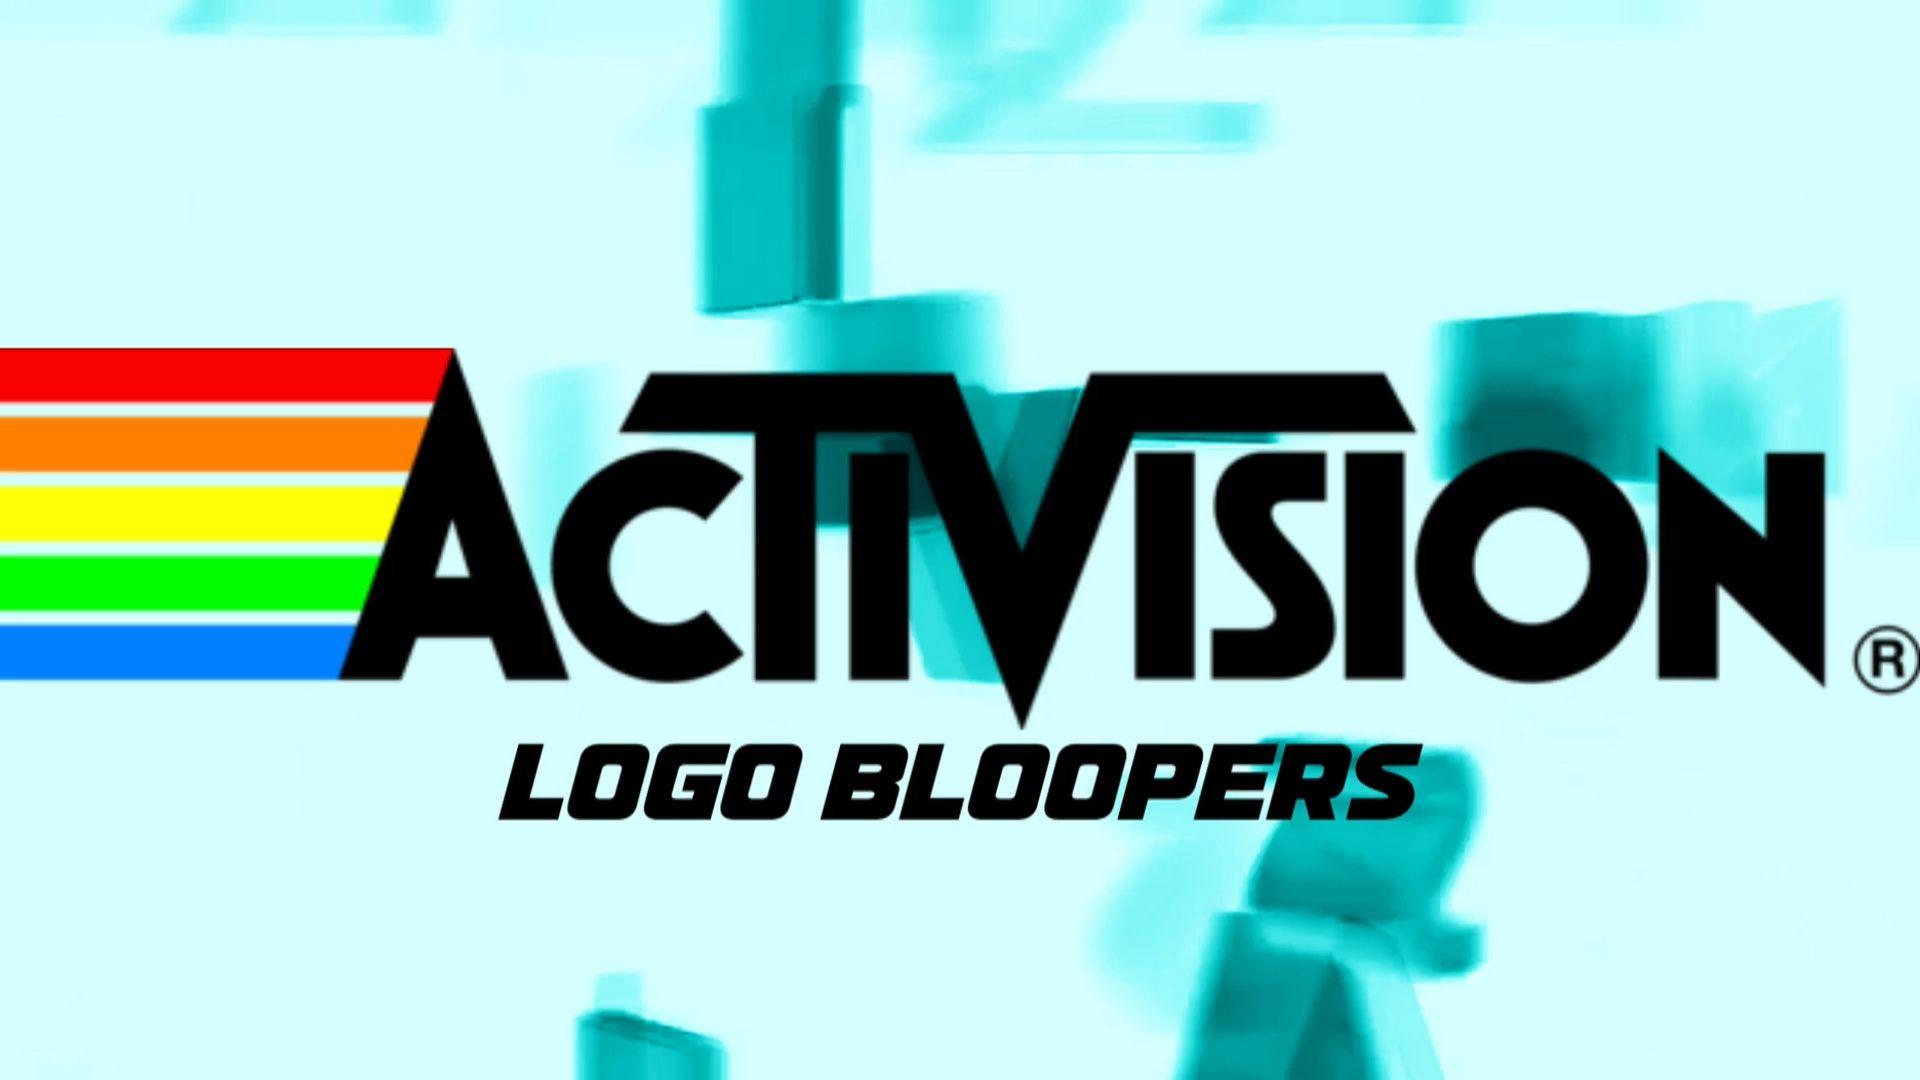 Activision Logo - Activision Logo Bloopers | Activision Logo Bloopers Wiki | FANDOM ...